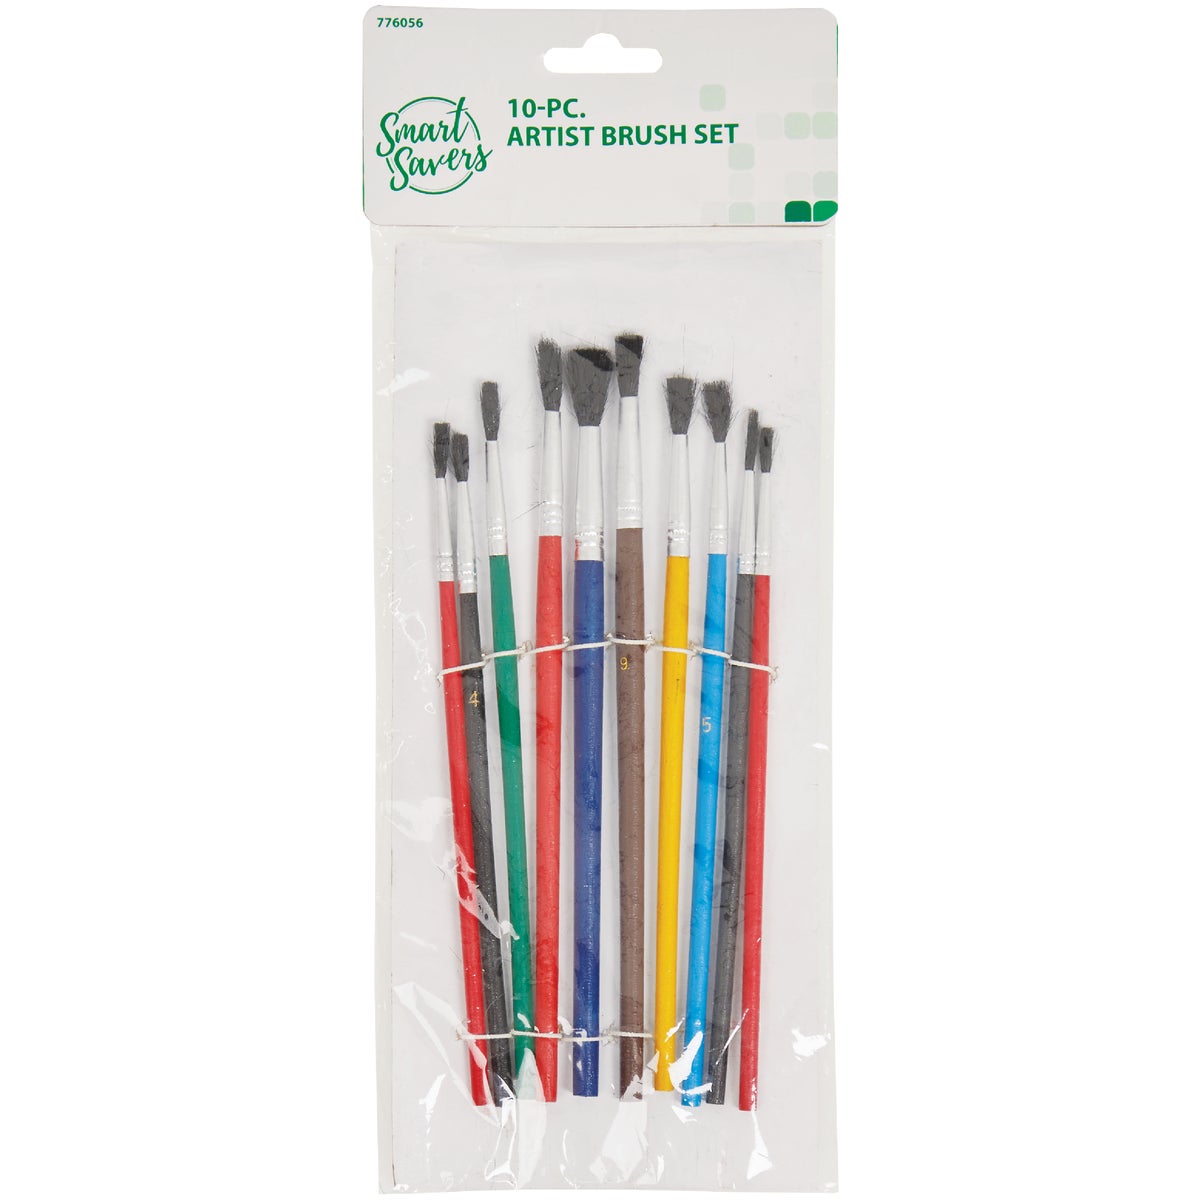 Smart Savers Assorted - 1/8 In. To 1/4 In. Polyester Artist Brush Set (10-Piece)